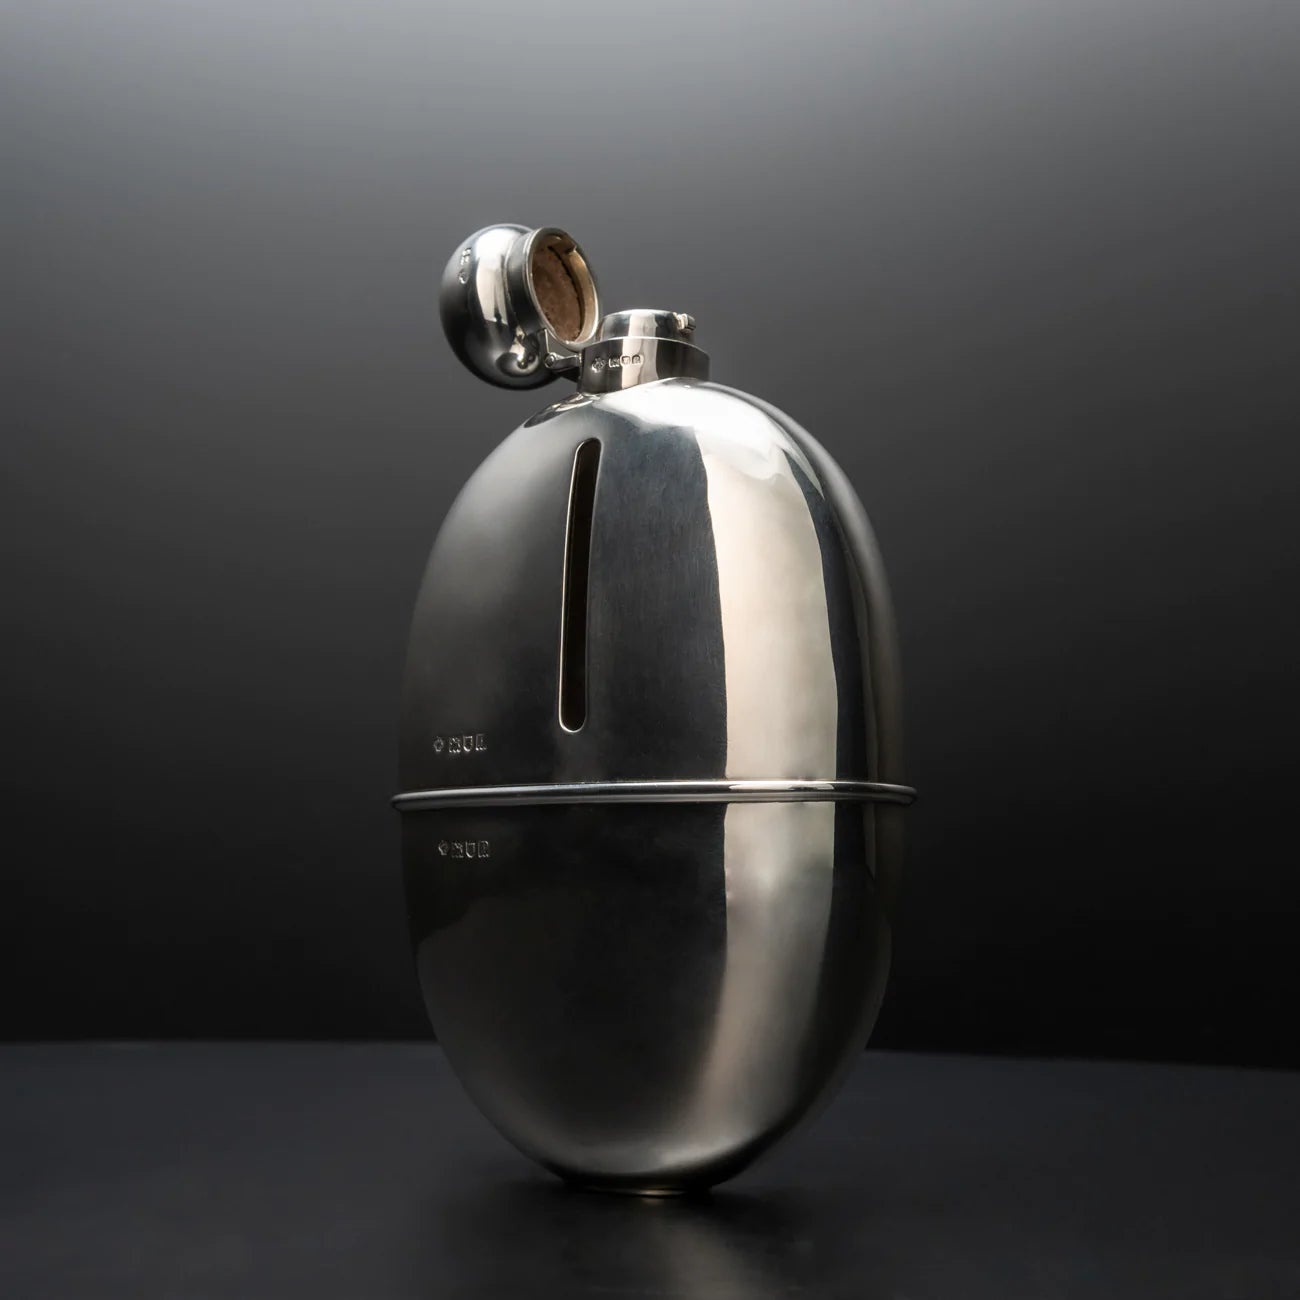 Large shaped silver and glass flask, hallmarked London 1910. The body of the flask is topped with a cork lined stopper that is on a hinged bayonet closer. A silver removable cup covers the lower half of the body and the silver covering the top half